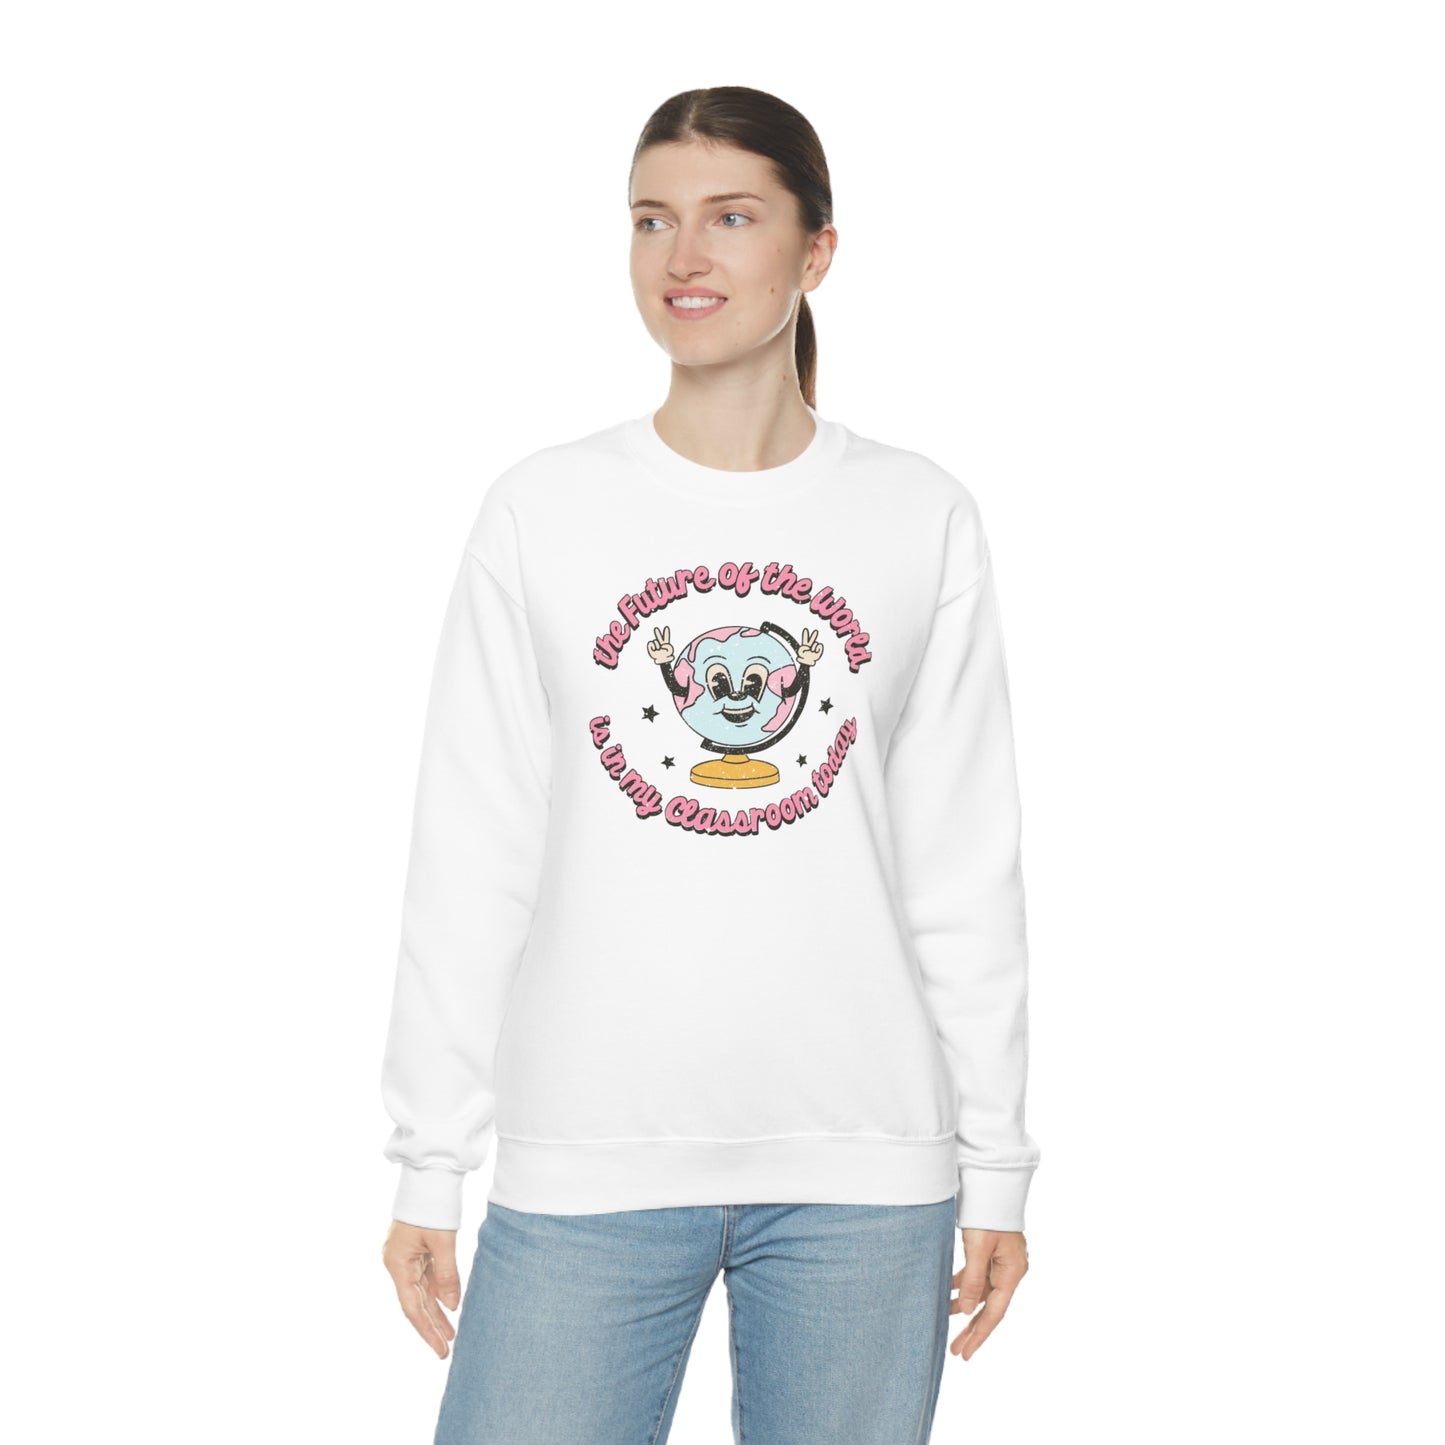 "The Future of the World is in My Classroom Today" - Unisex Heavy Blend™ Crewneck Sweatshirt